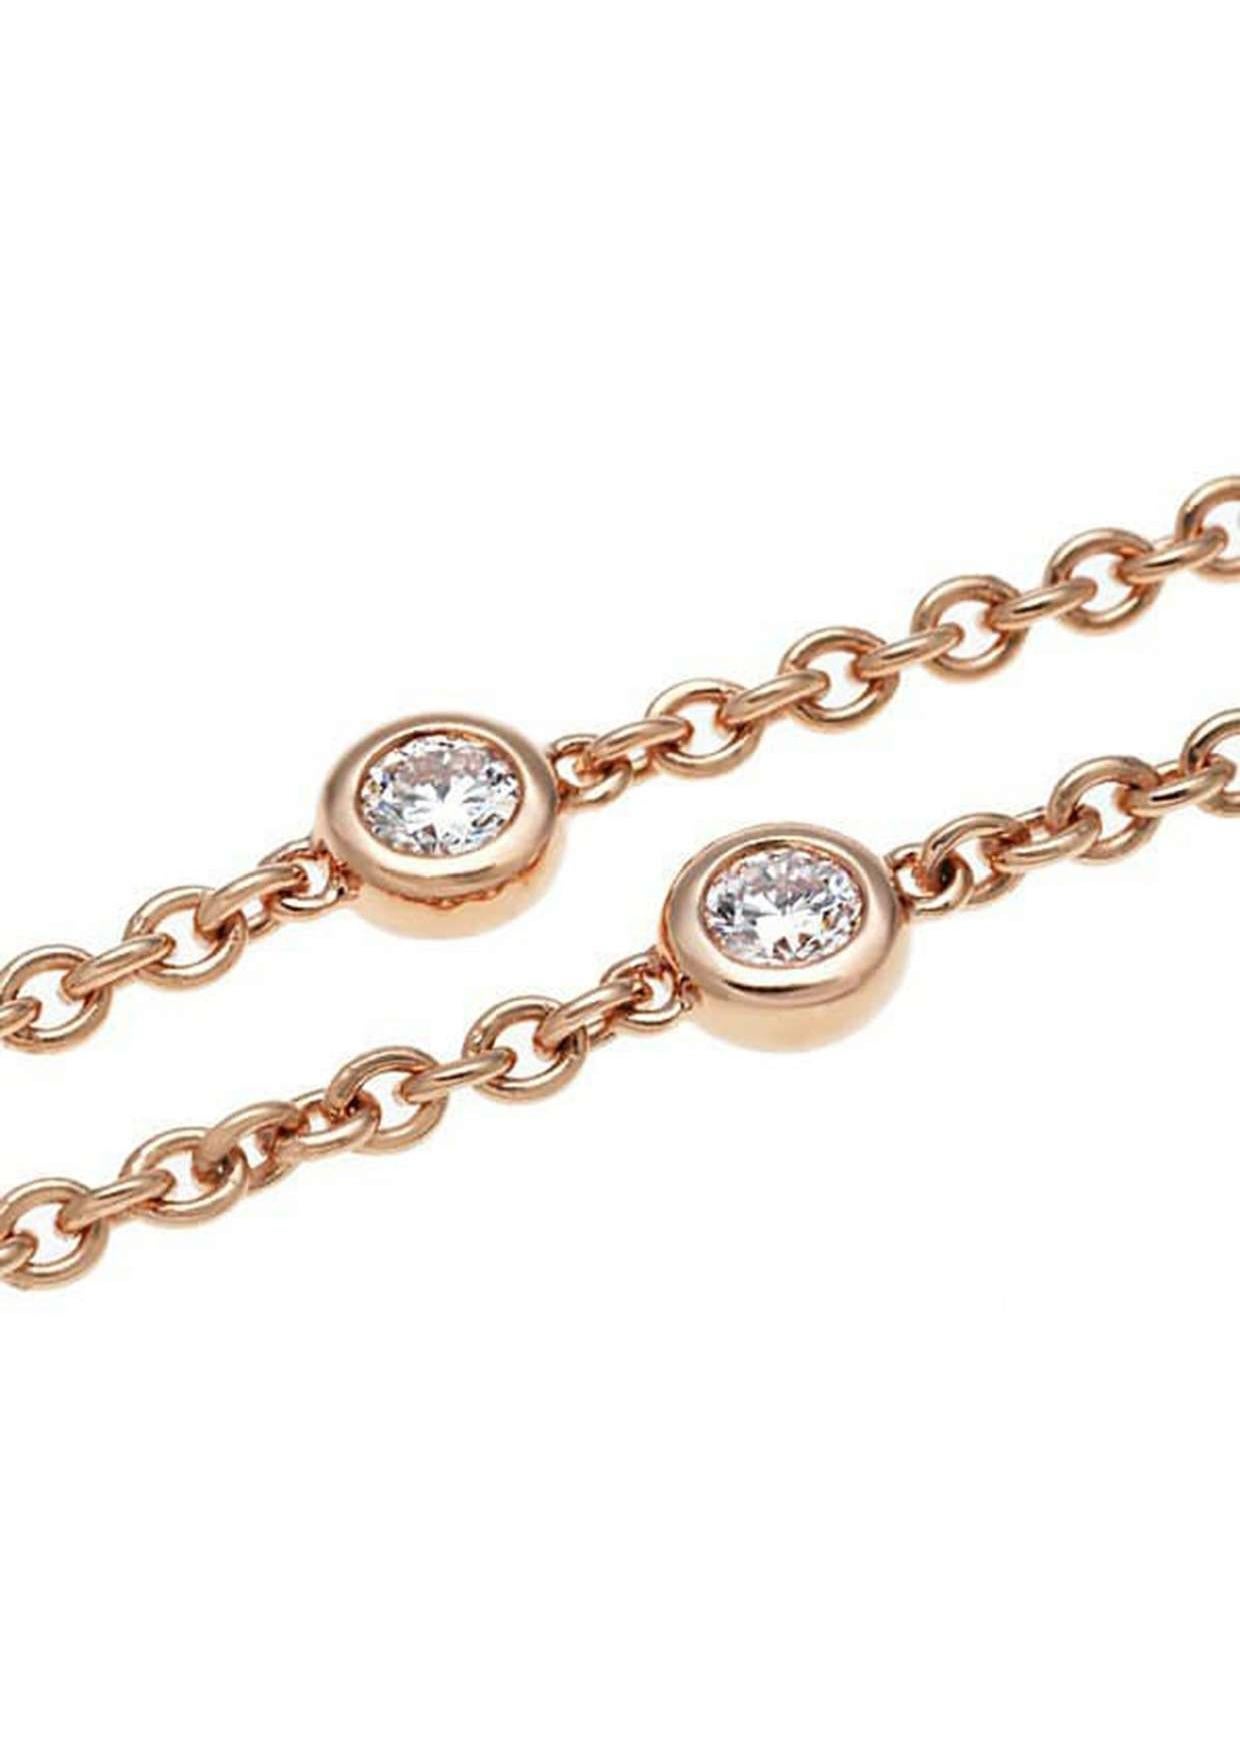 Elevate your wrist with this exquisite 18K Pink Gold Diamond Station Bracelet, adorned with sparkling diamonds totaling 0.29ct.

Details:

* SKU: cin384
* Material: 18K Pink Gold
* Jewelry Type: Bracelet
* Total Length: Approximately 17/18cm
*